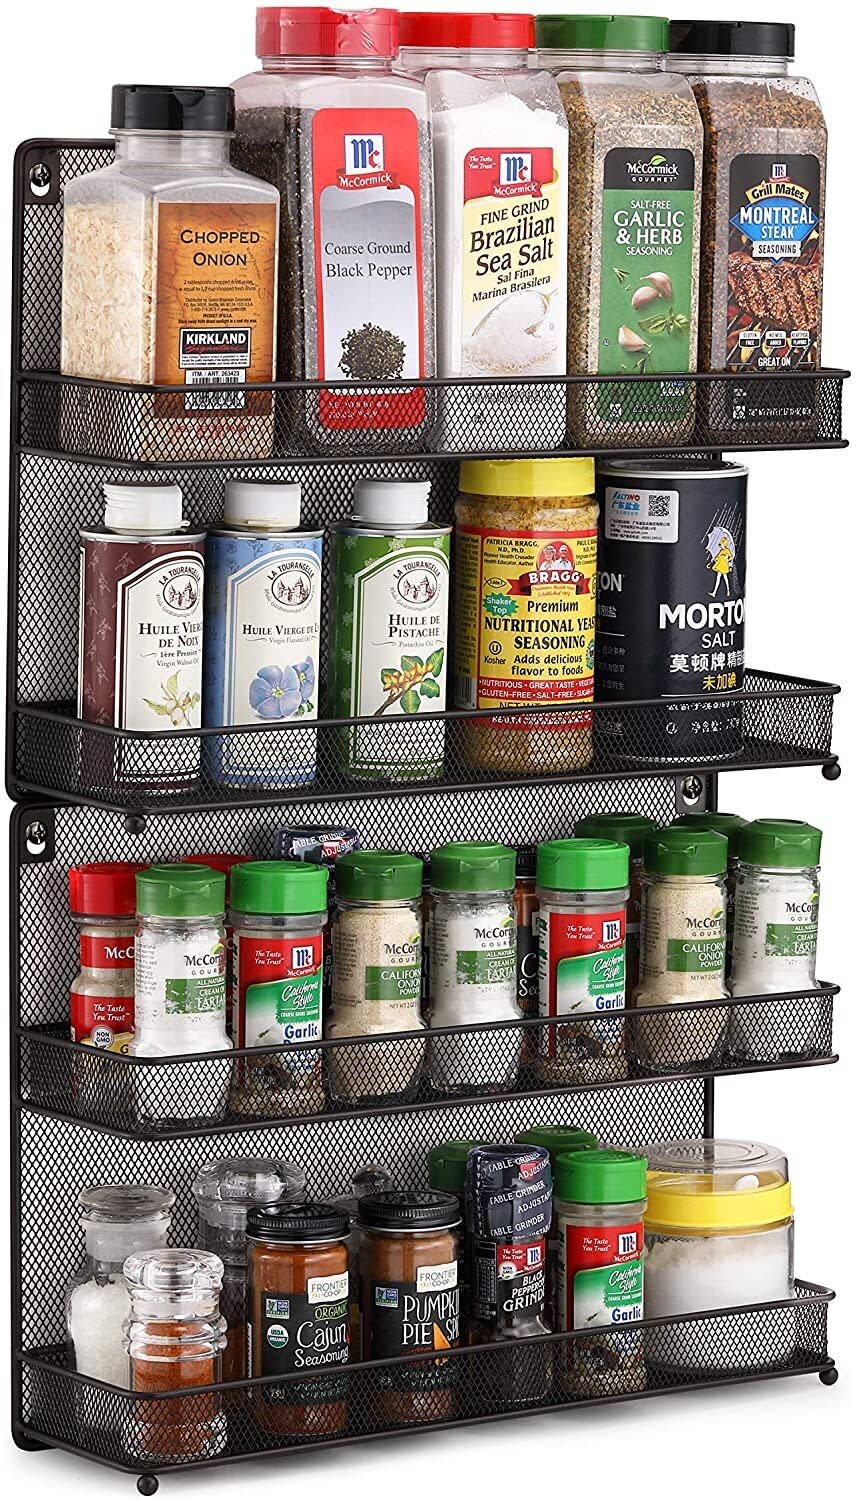 This <a href="https://amzn.to/36jyQOi" target="_blank" rel="noopener noreferrer">spice rack</a> can be mounted to a wall, attached inside a cabinet door or placed on a countertop to keep spices and seasonings organized. Stack two together for double the storage. Find it for $32 on <a href="https://amzn.to/36jyQOi" target="_blank" rel="noopener noreferrer">Amazon</a>.